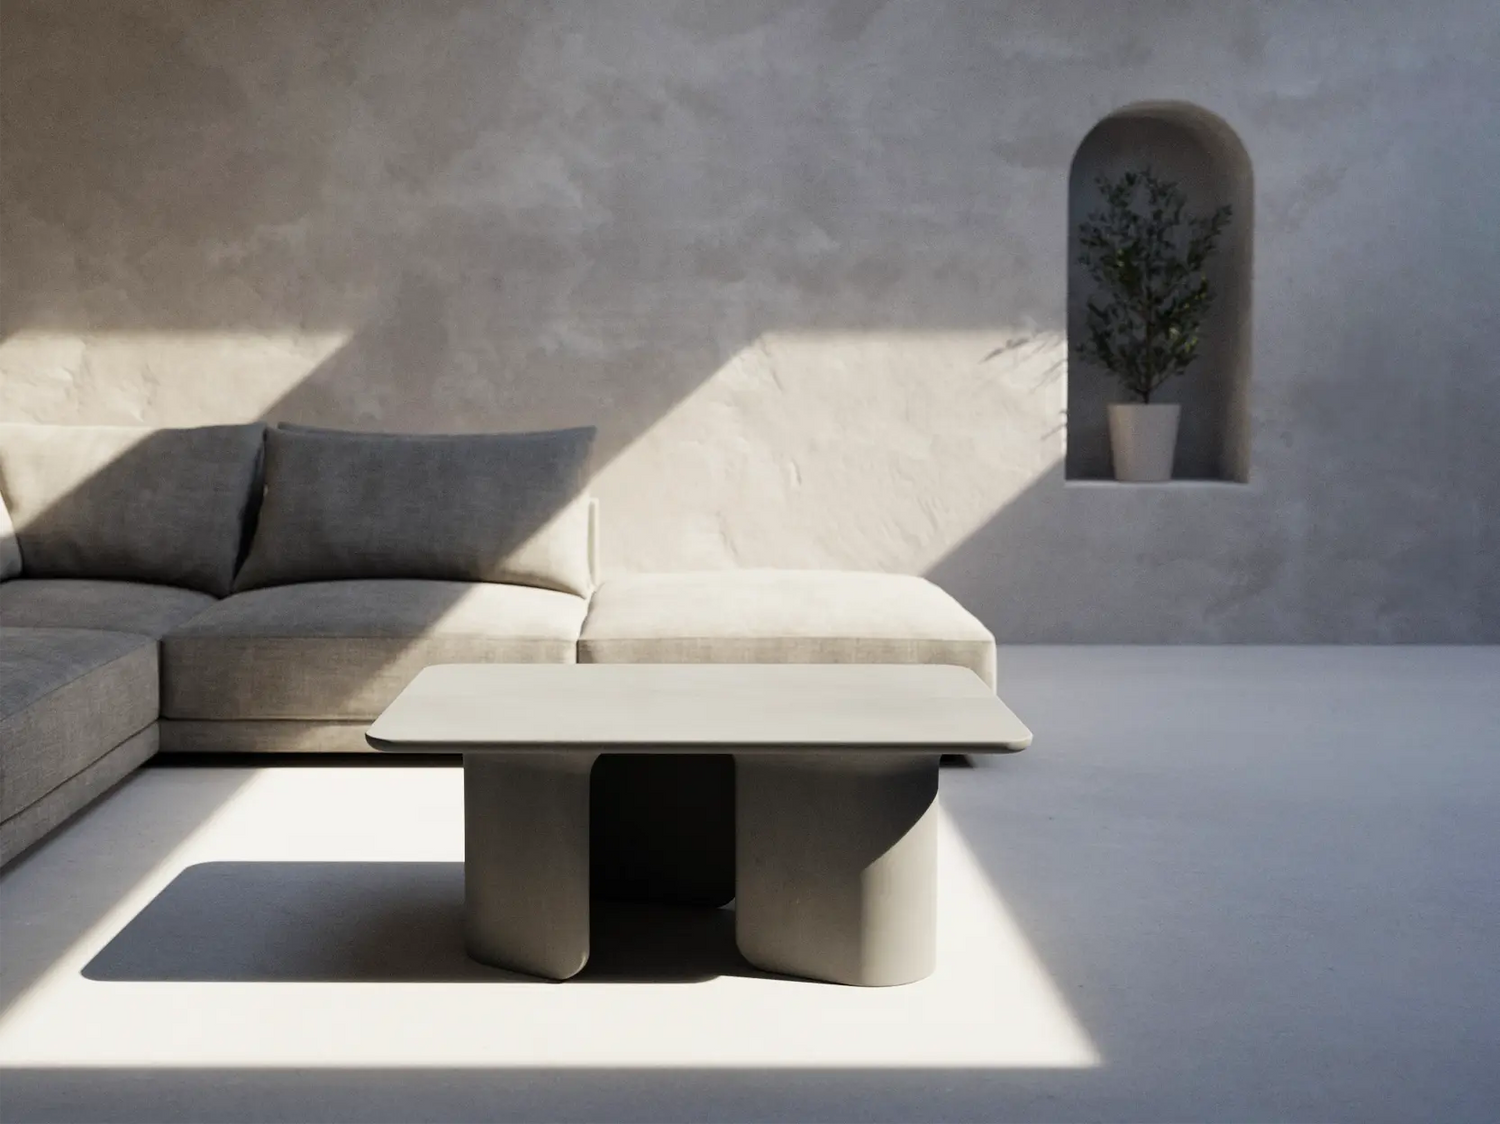 A Mist Grey Tor Concrete Coffee table in an open minimalist living space.